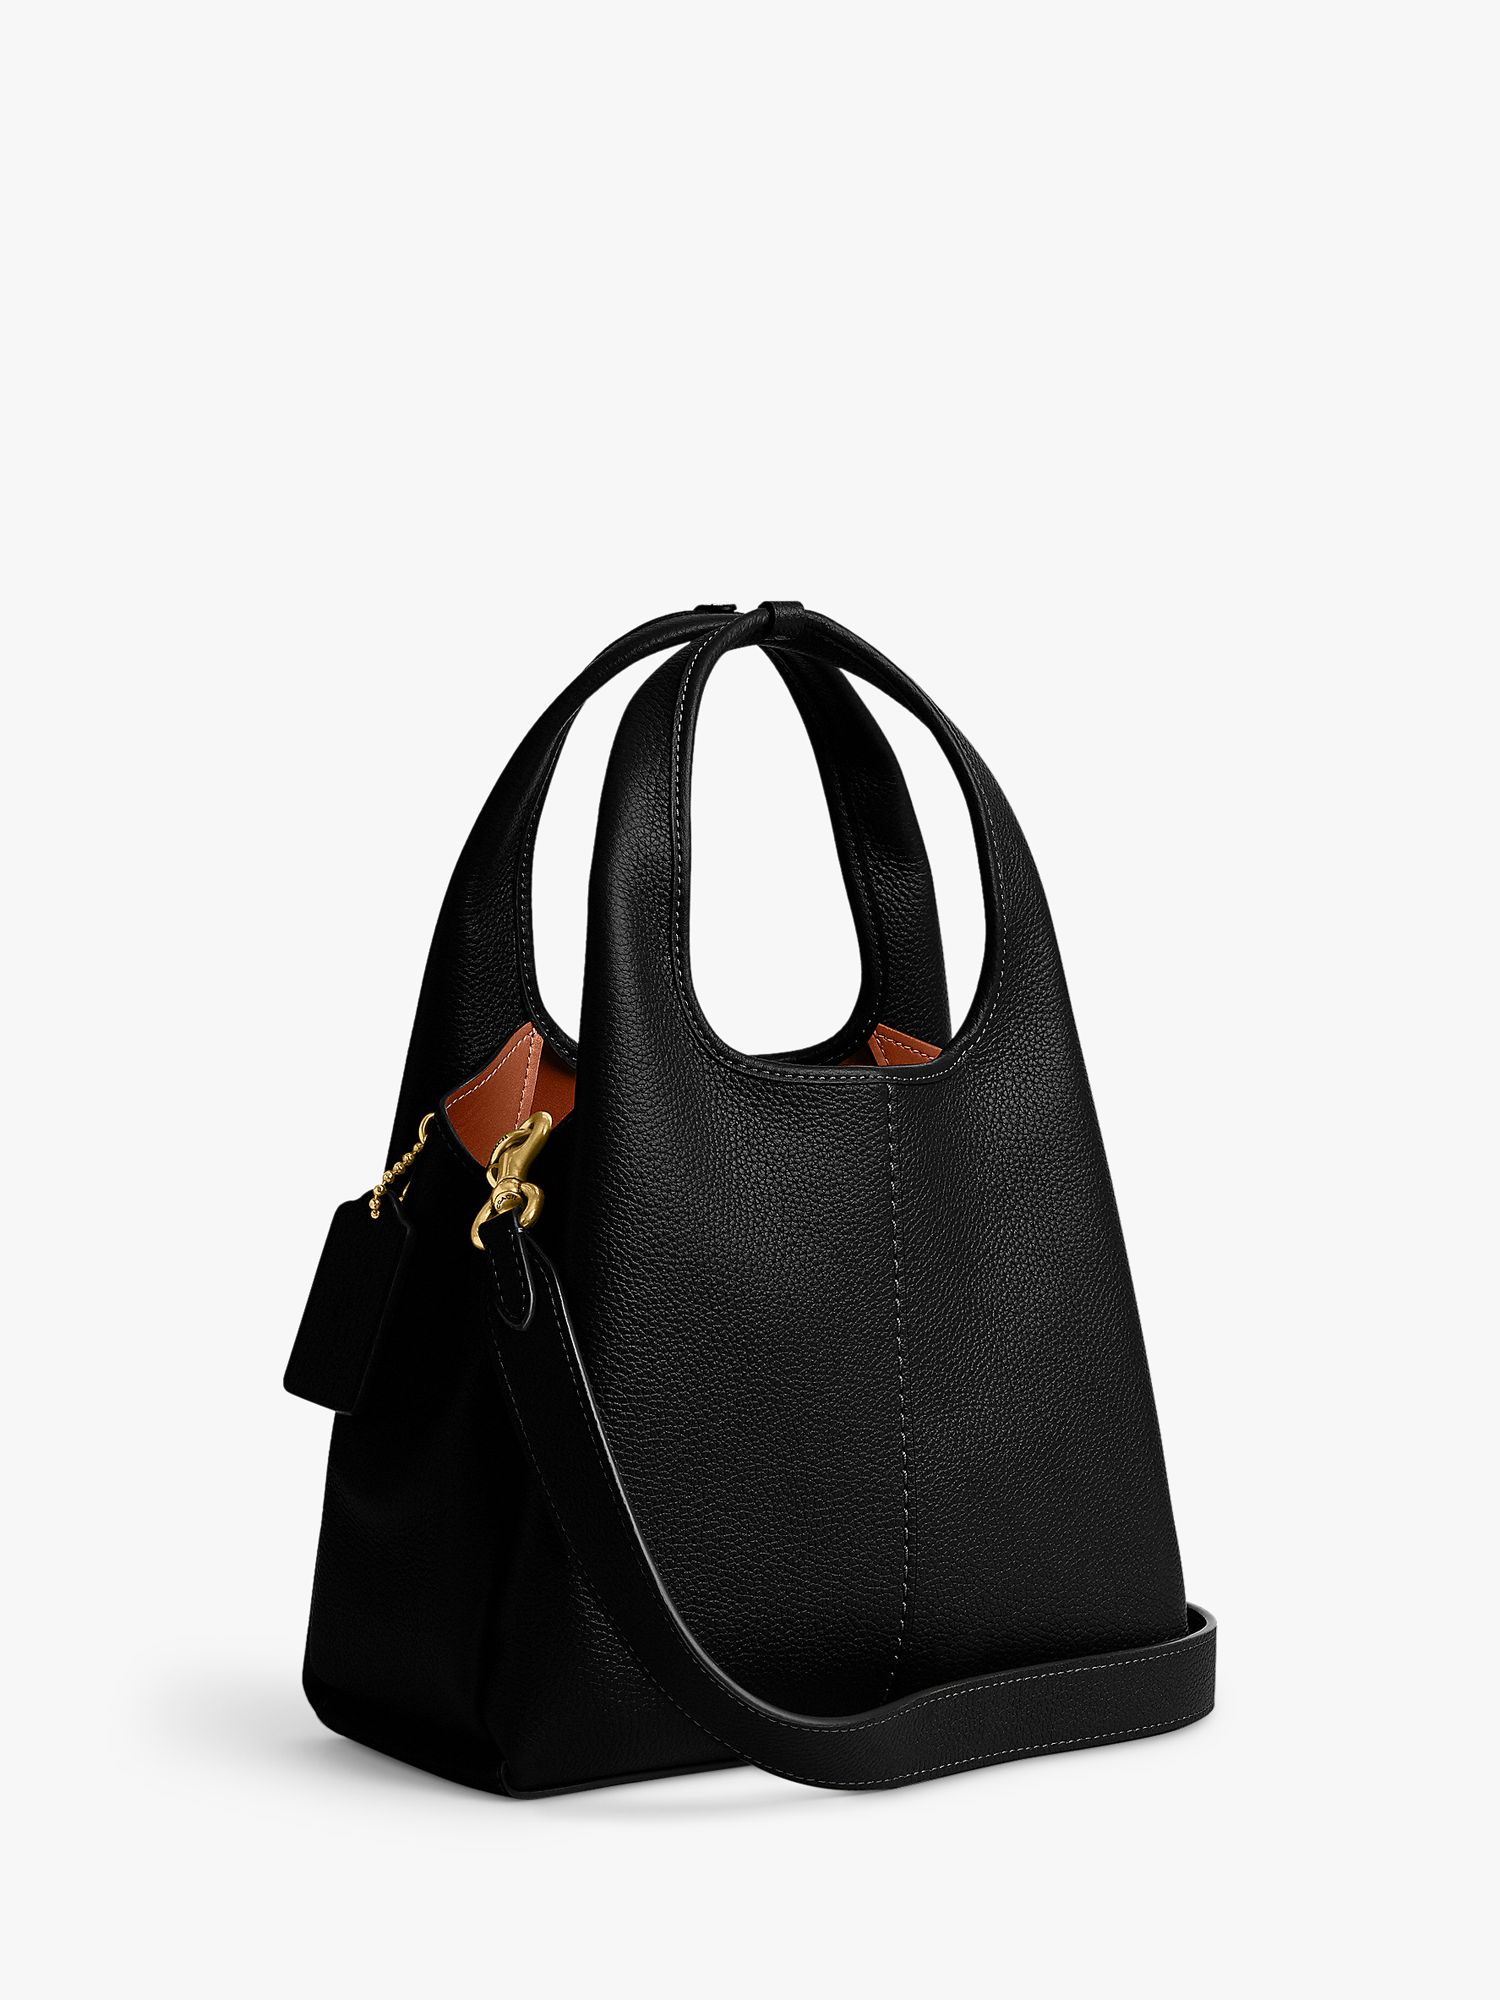 Buy Coach Lana 23 Small Leather Grab Bag Online at johnlewis.com